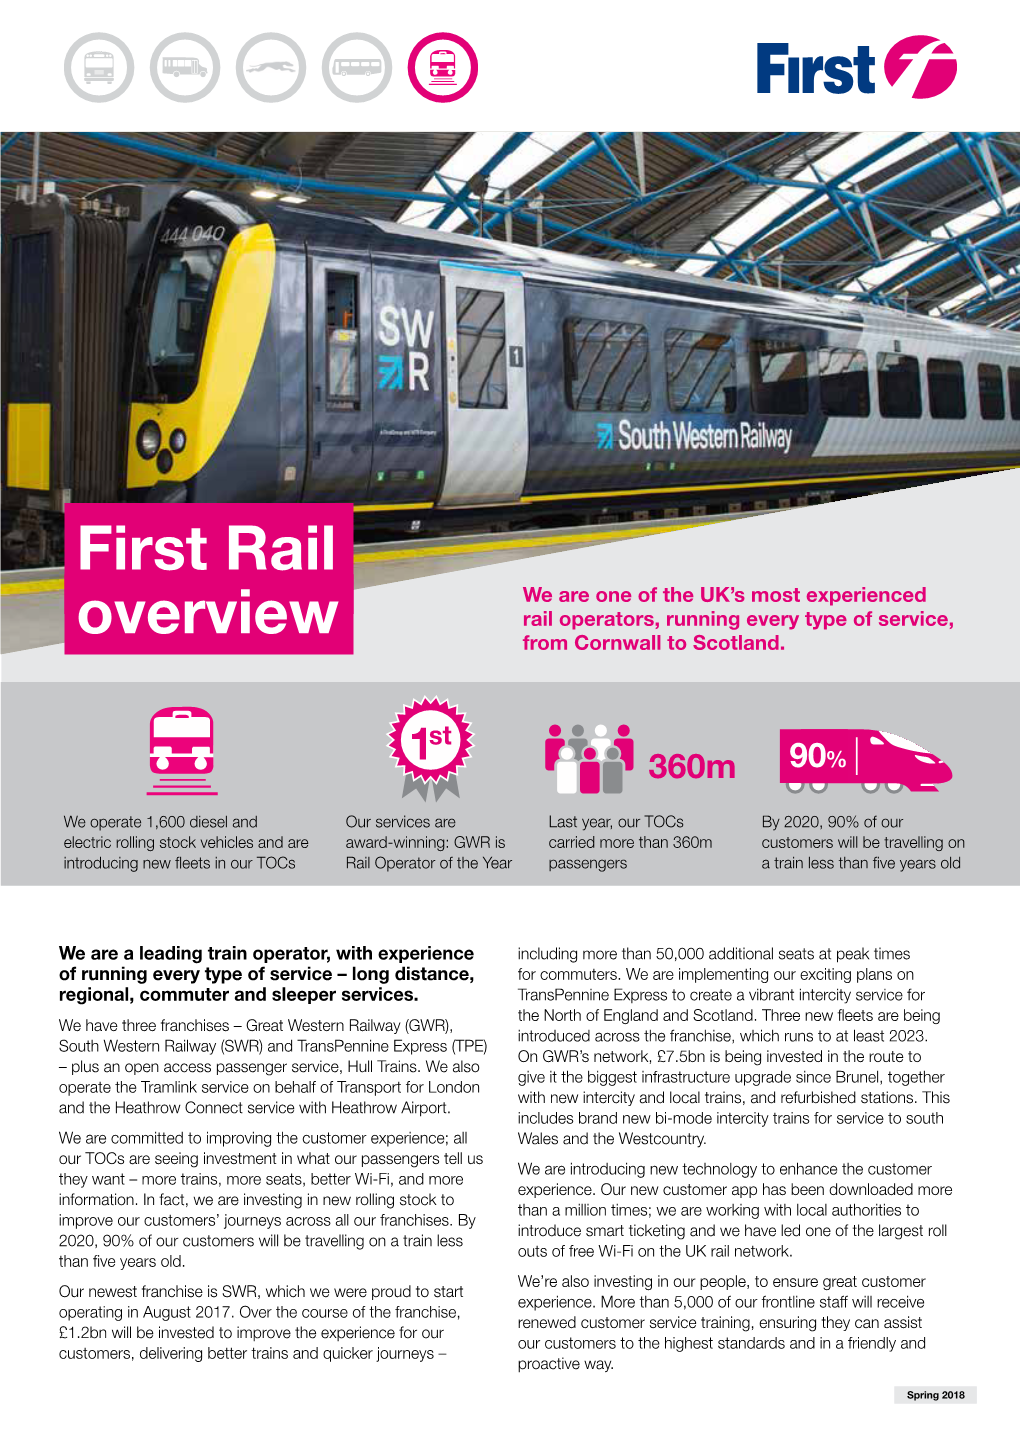 First Rail Overview